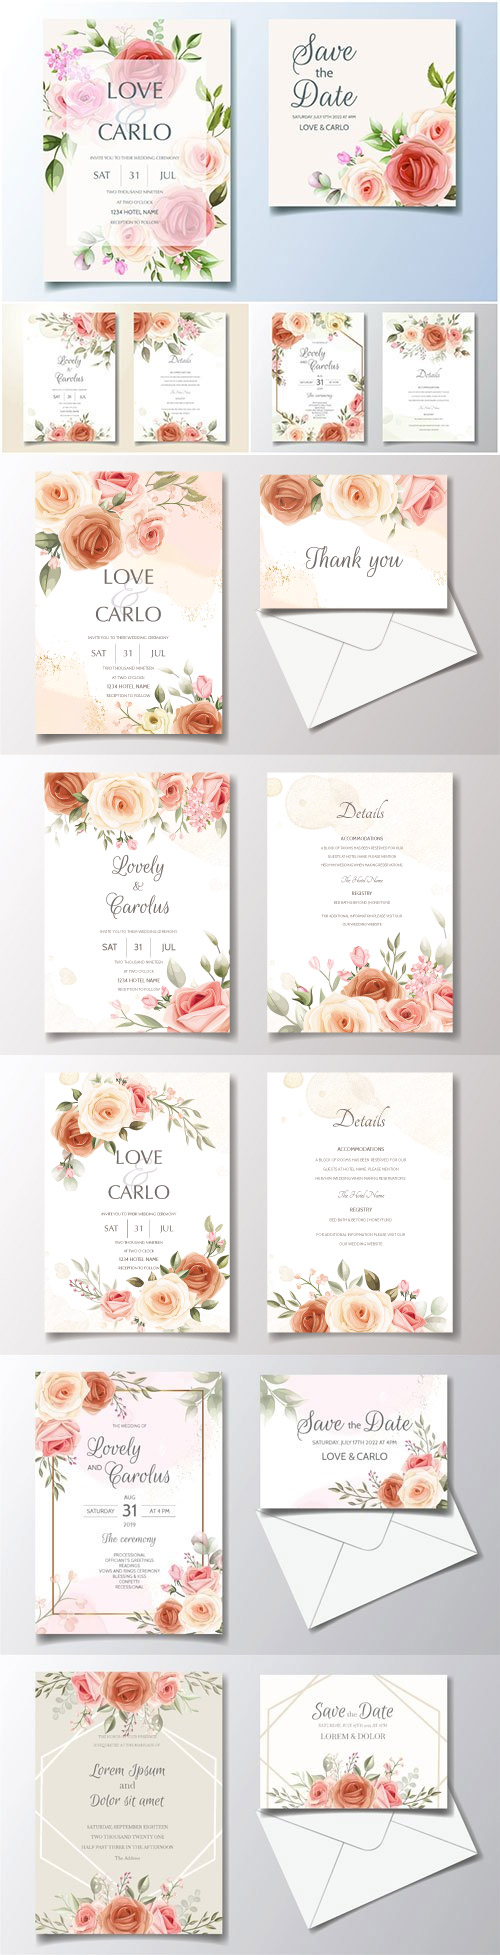 Wedding invitation card set template with beautiful floral frame